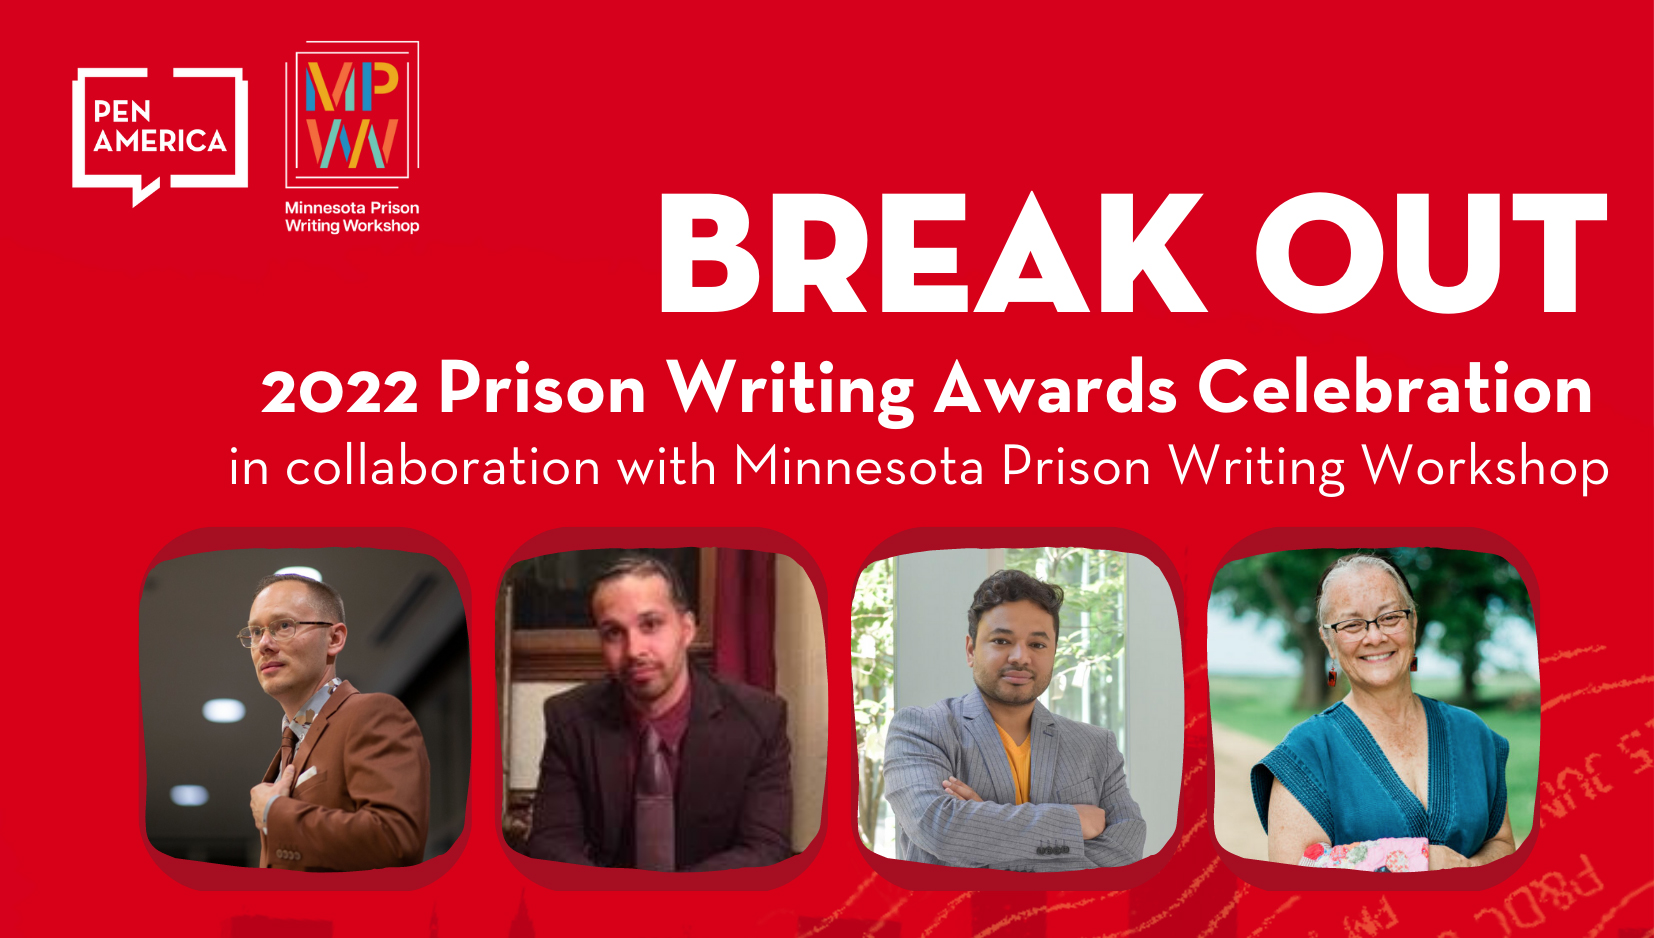 BREAK OUT - 2022 Prison Writing Awards Celebration in collaboration with Minnesota Prison Writing Workshop Wednesday, March 29 The Hook and Ladder Theater 5-7pm CT Social Hour 7-8pm CT Reading